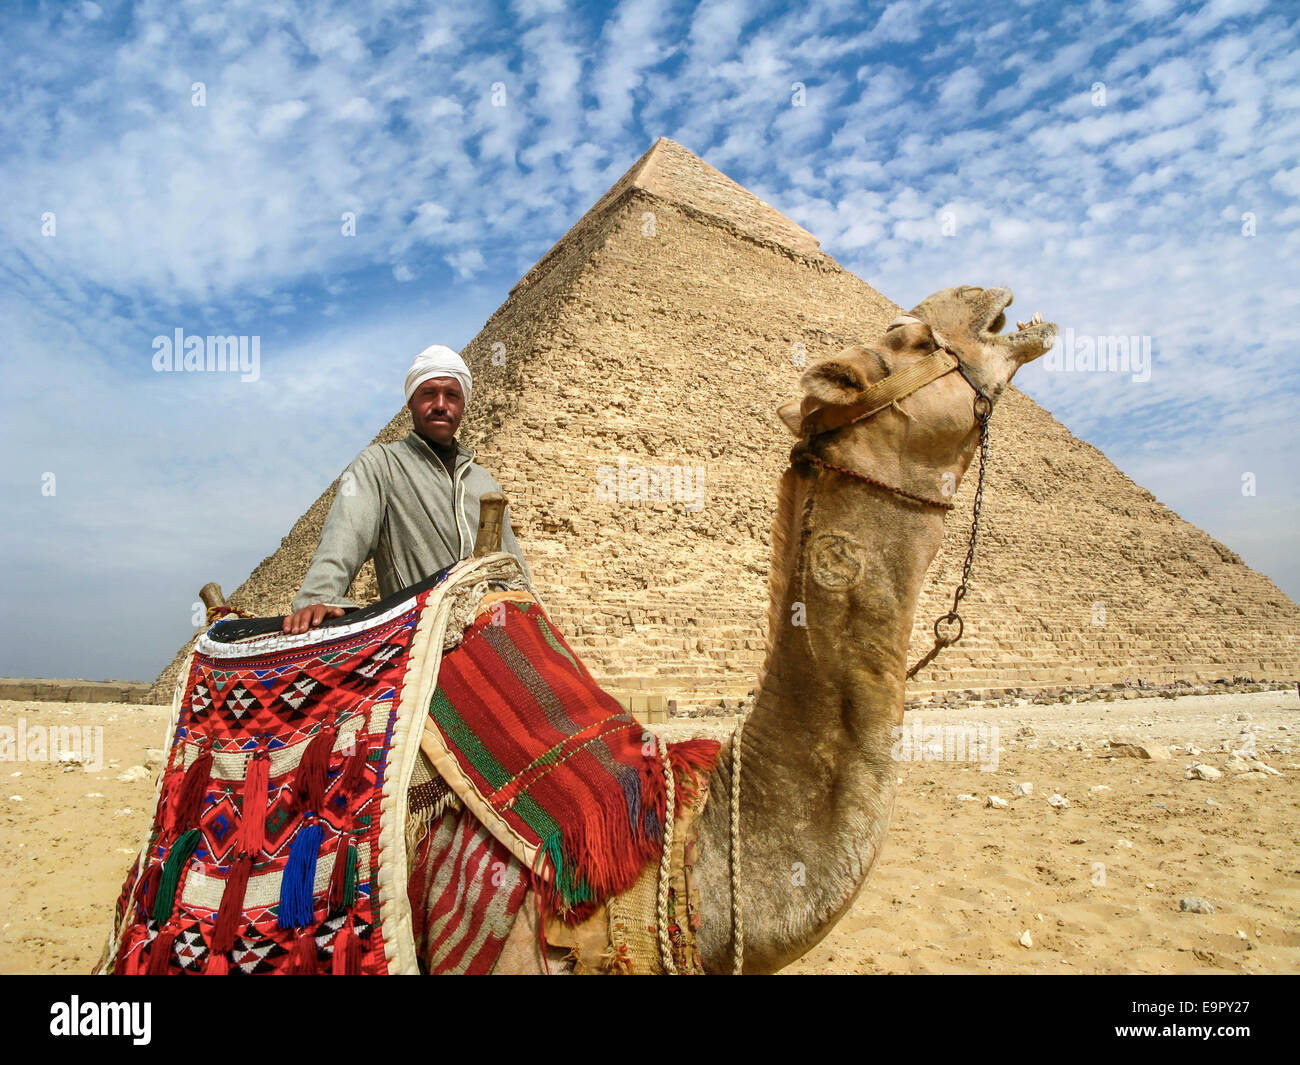 Portrait of a camel man with his camel in front of the Pyramid of Khafre on the Giza Plateau in Cairo, Egypt. Stock Photo